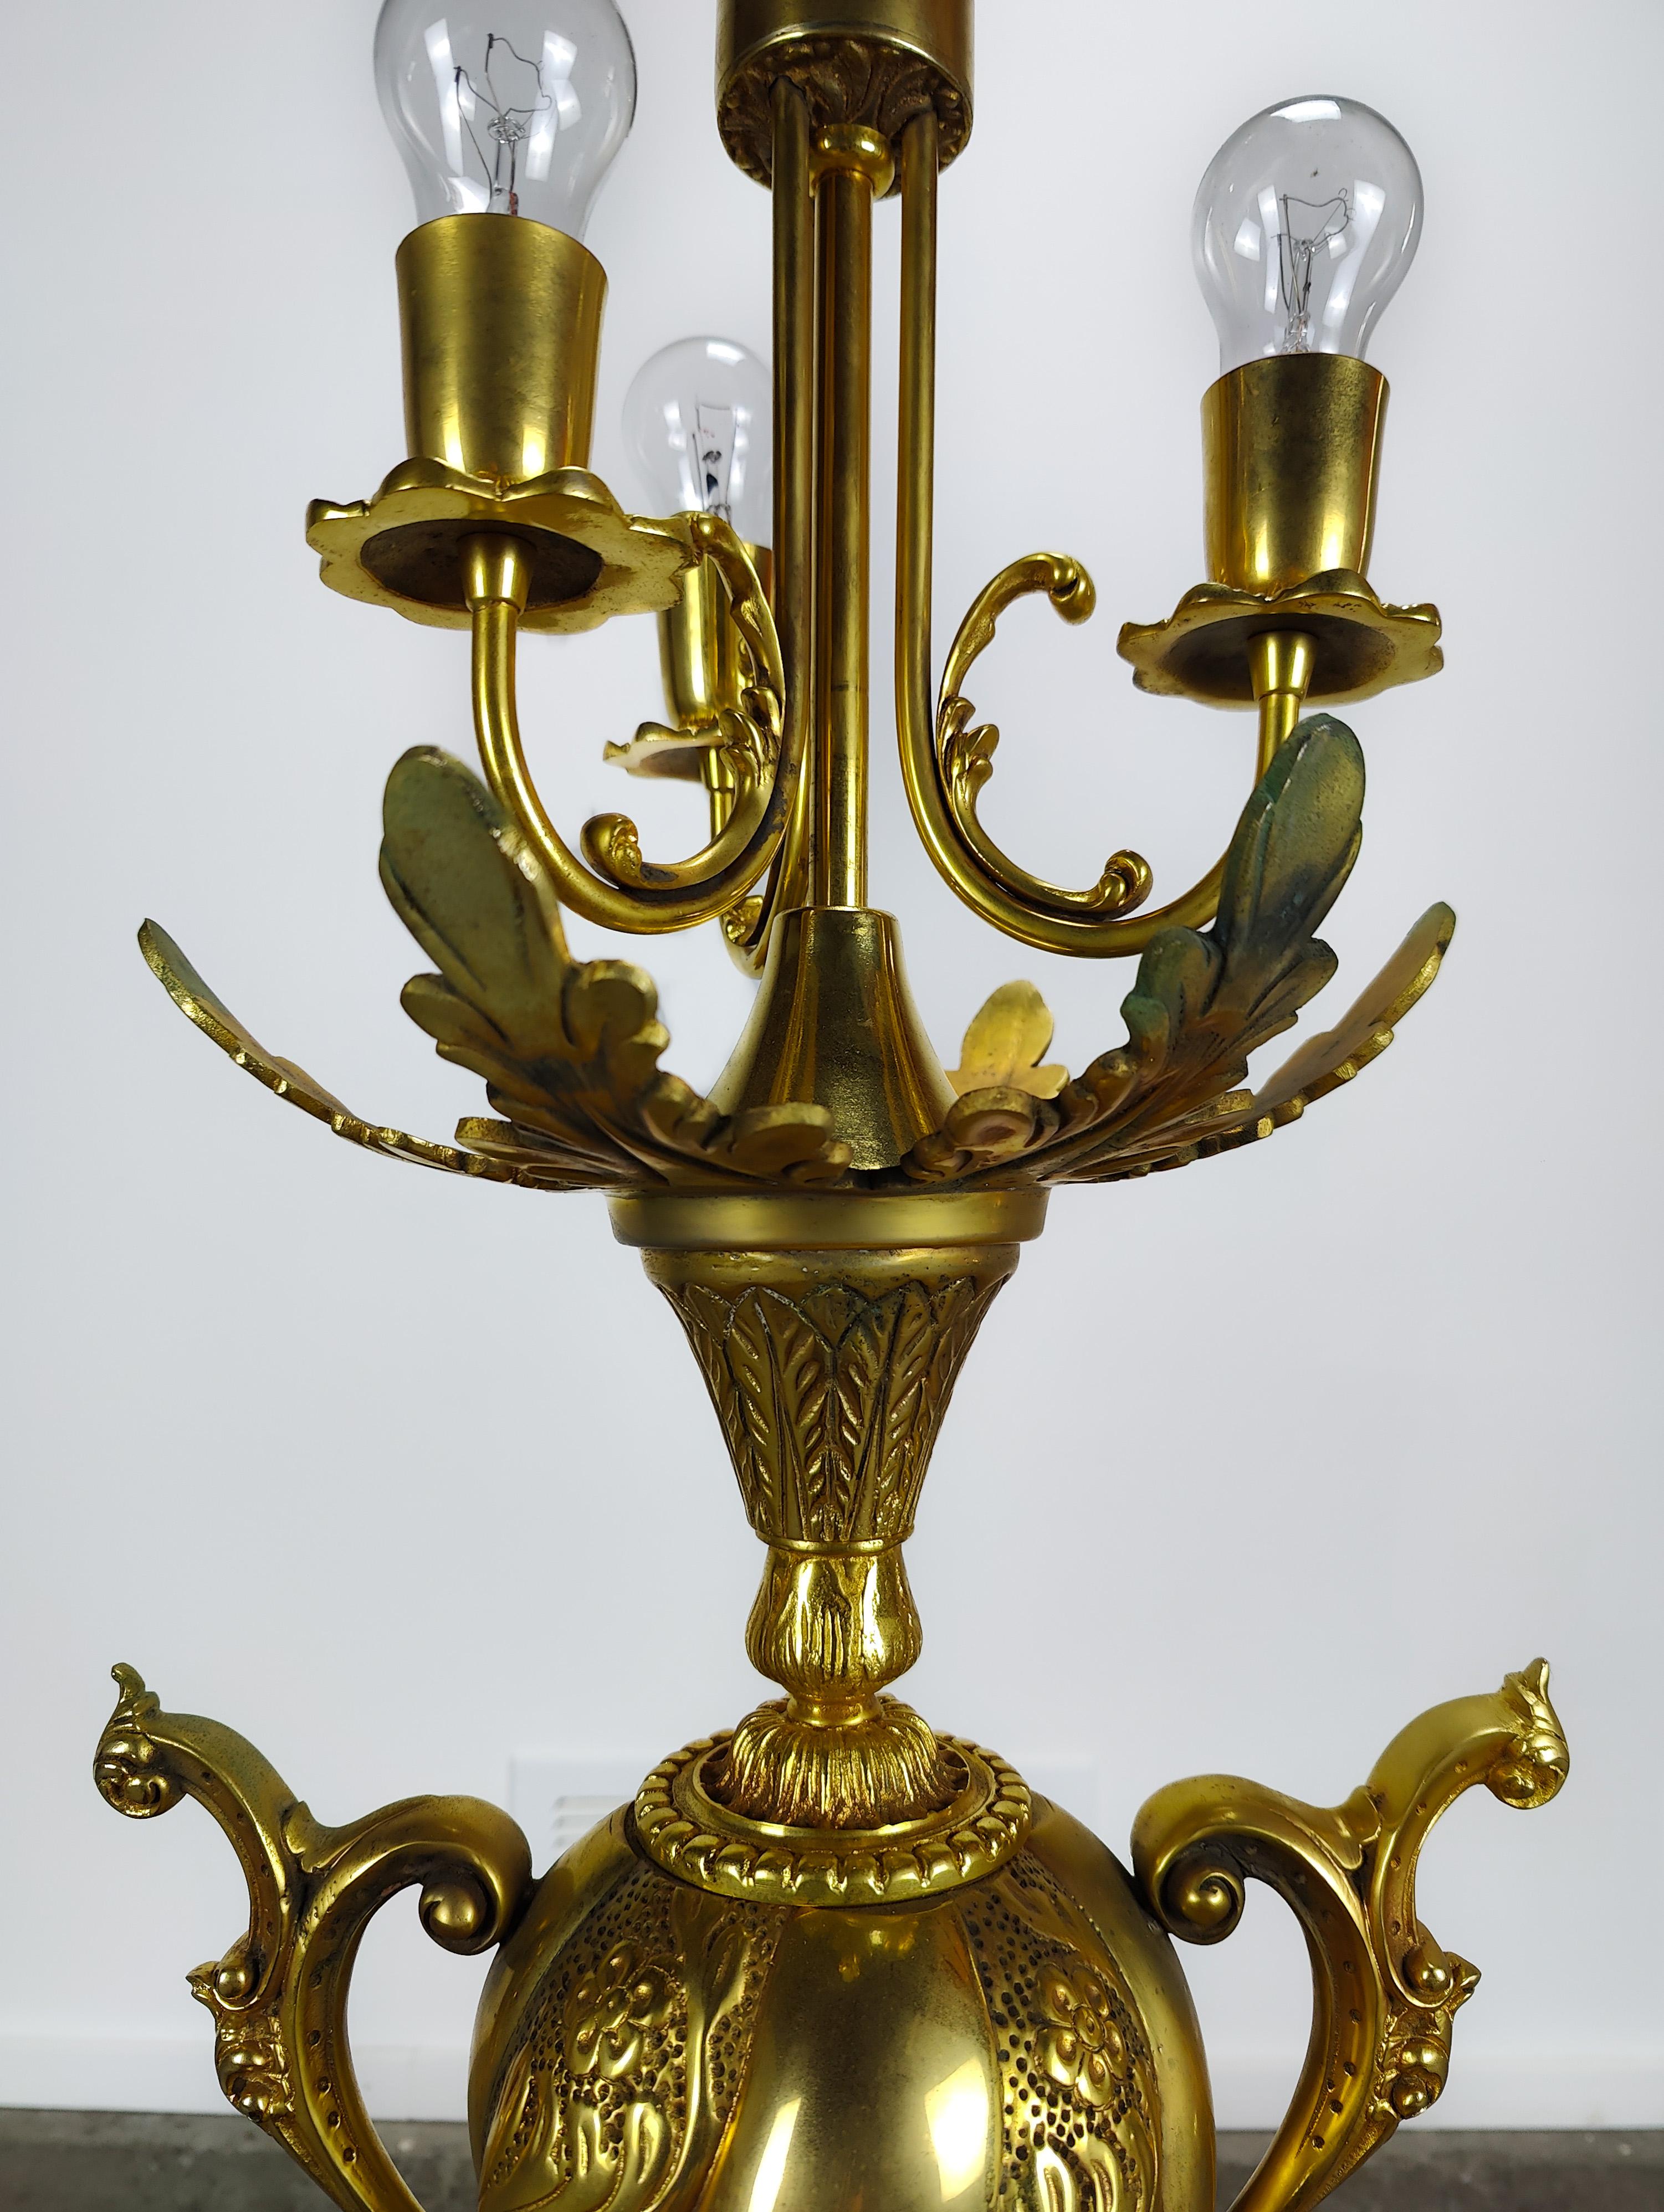 Just in - a regency brass table lamp. Excellent working condition with the perfect amount of patina throughout. Features a heavy brass body with intricate details. Measures approximately 30 inches tall.